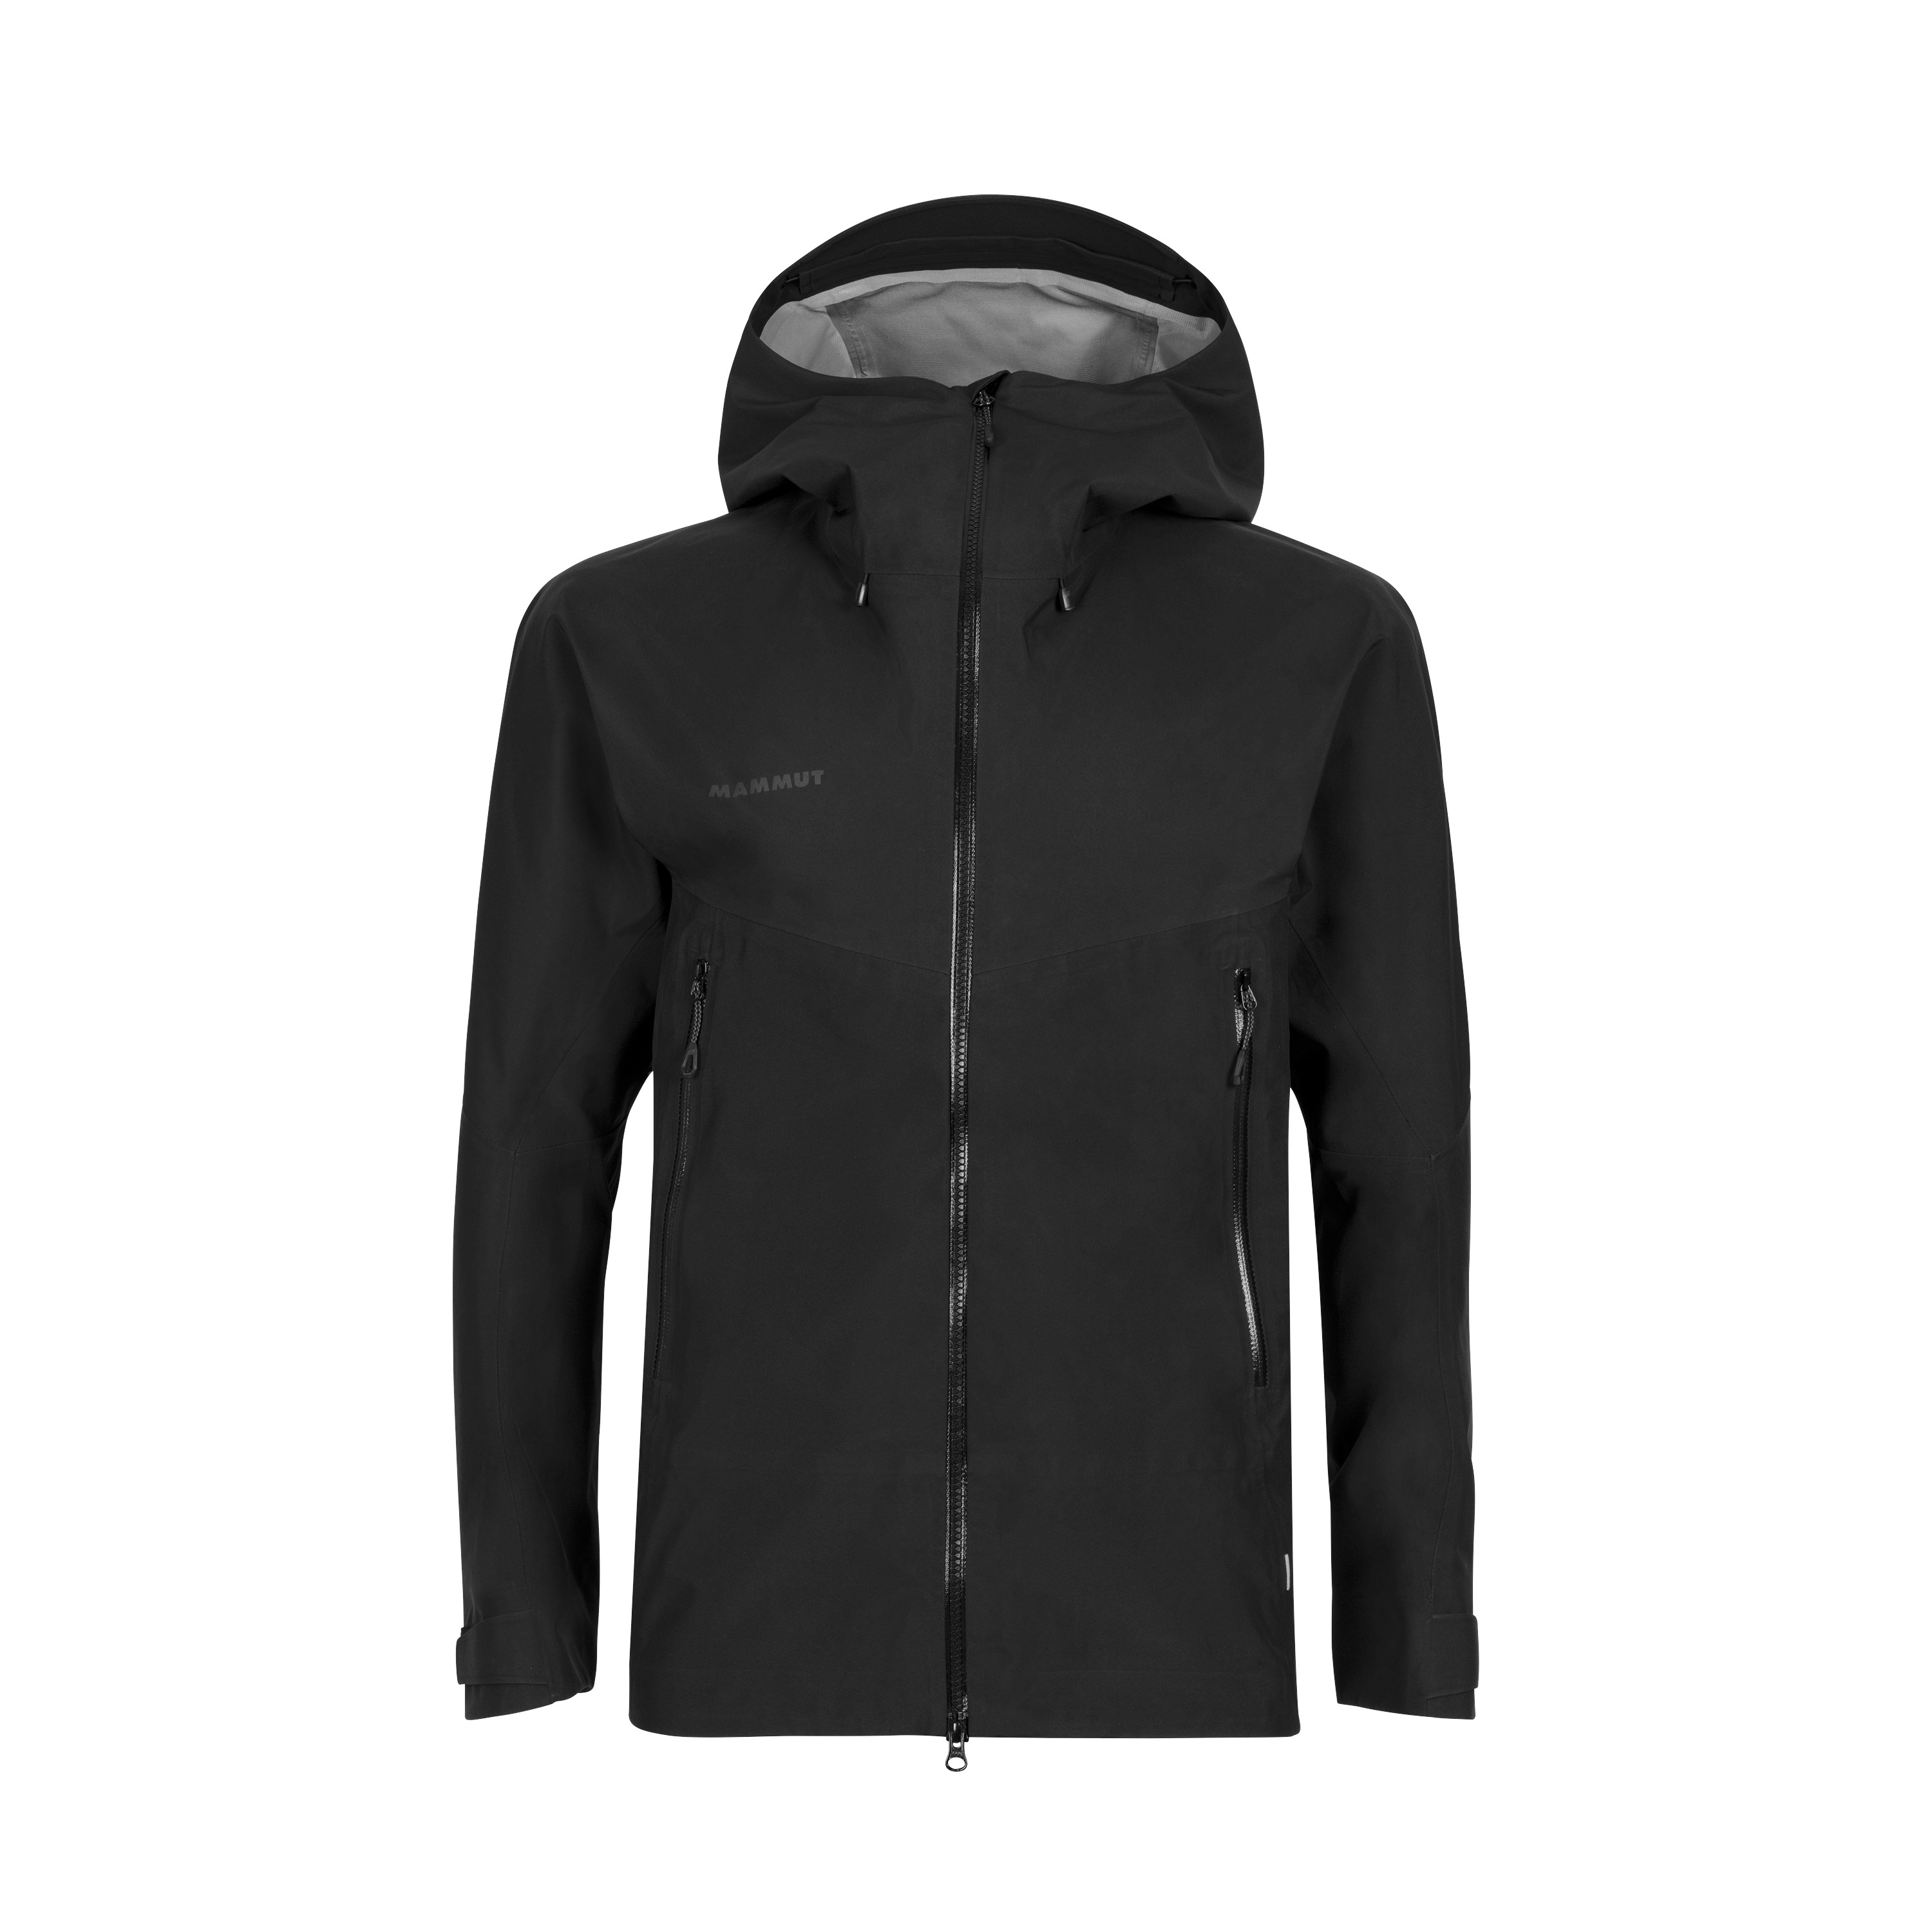 posterior Polvoriento Esta llorando Mammut Crater HS Hooded Jacket - Men's | w/ Free Shipping and Handling